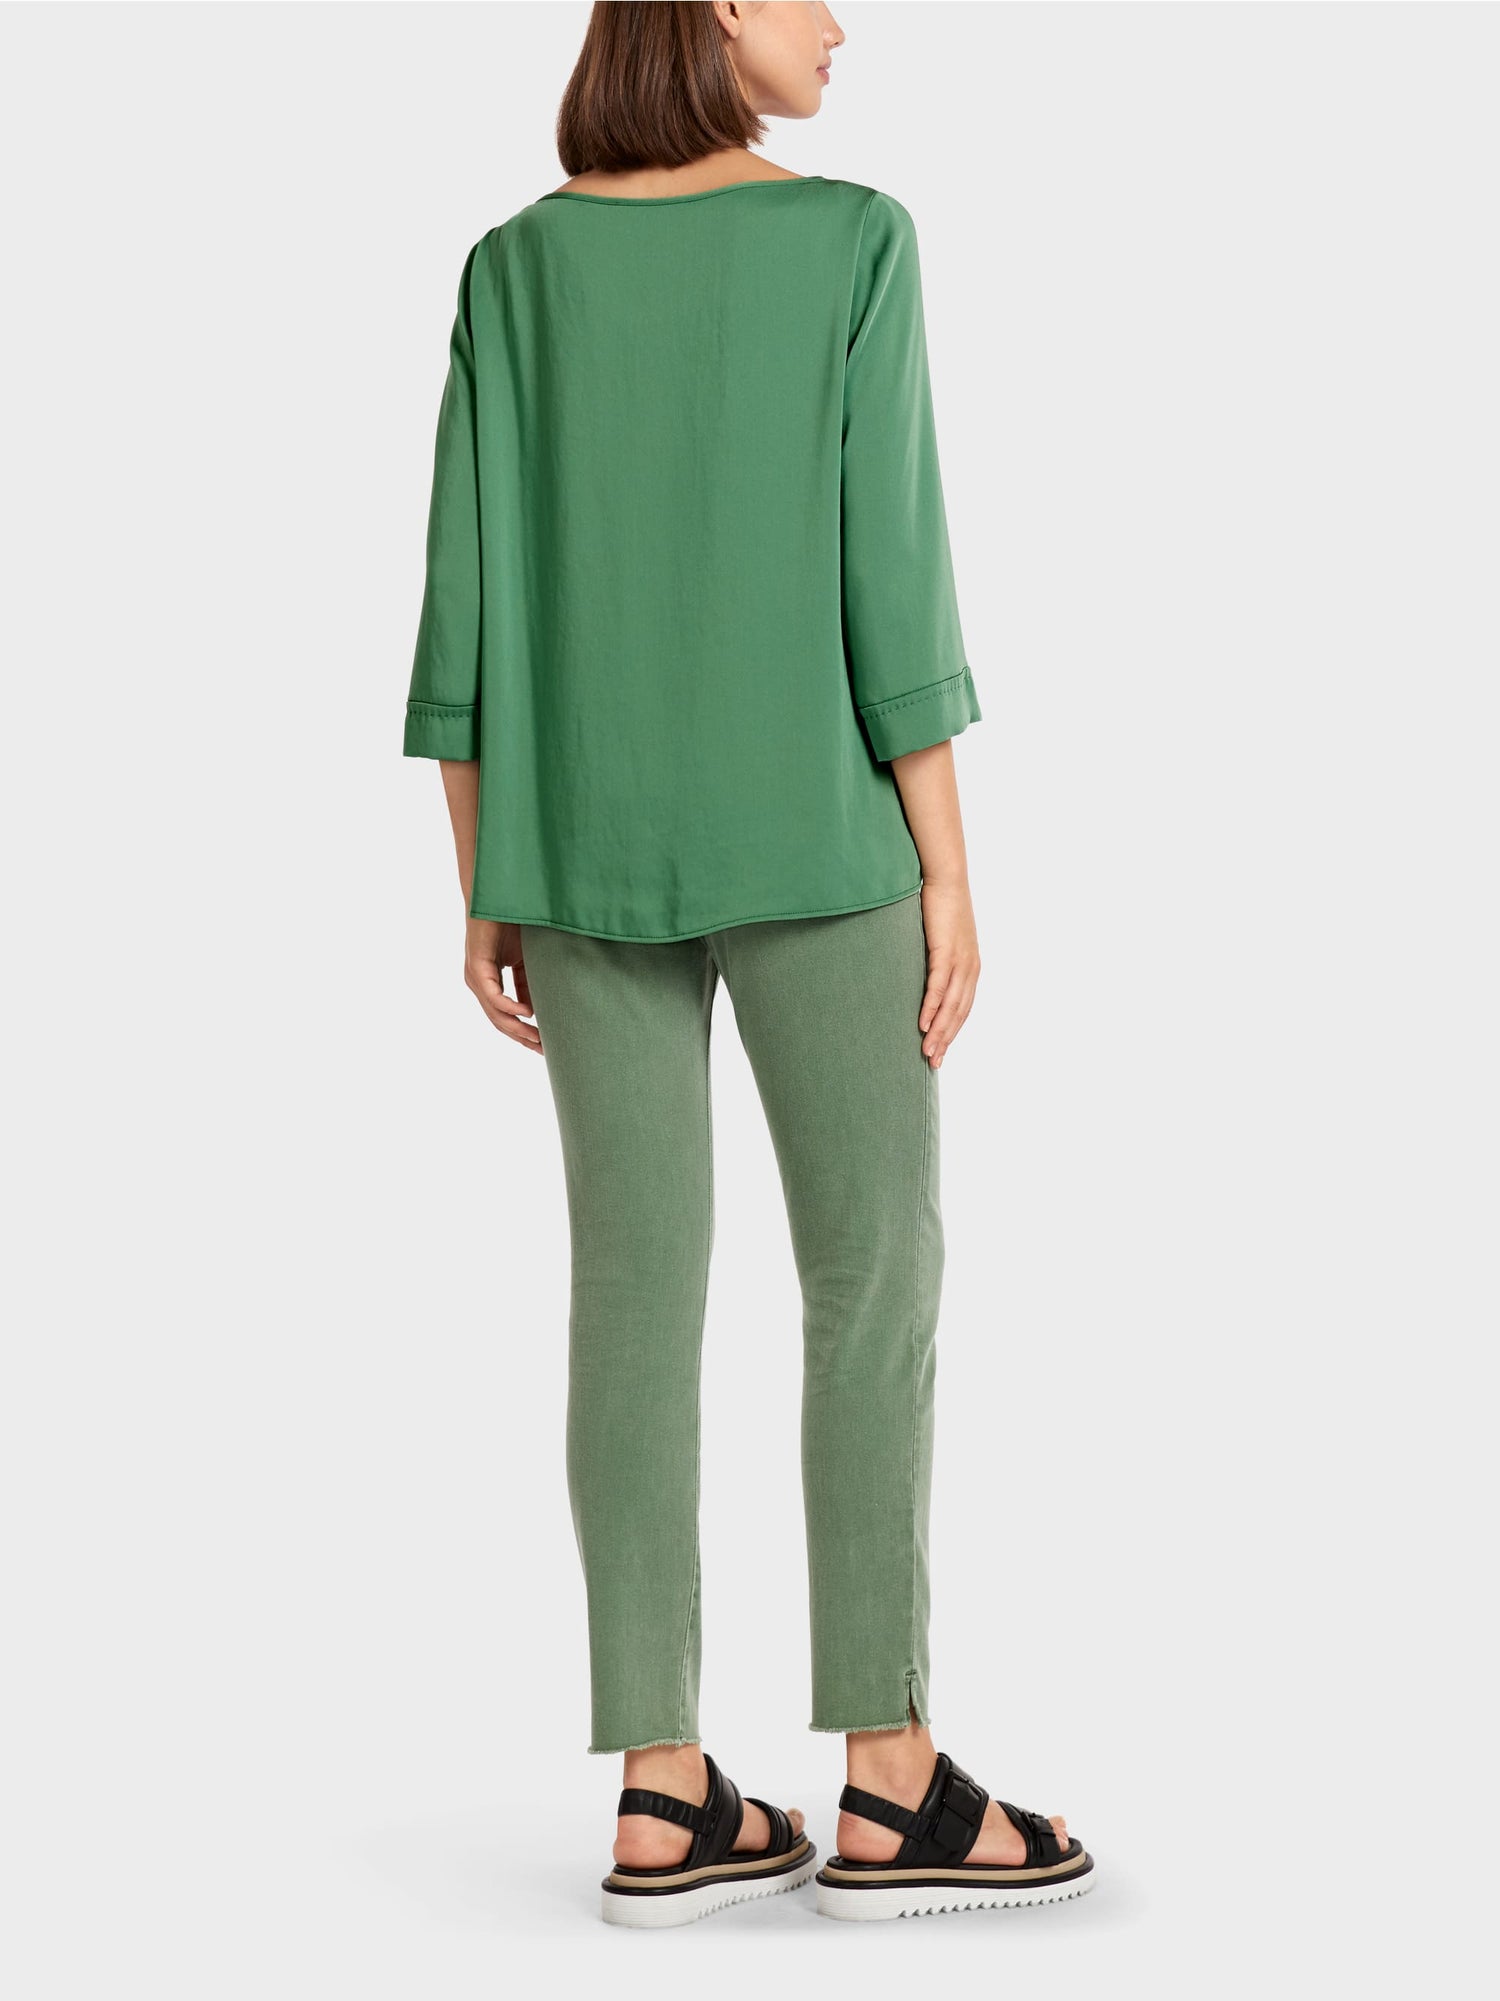 Blouse-Style Top With Boat Neckline